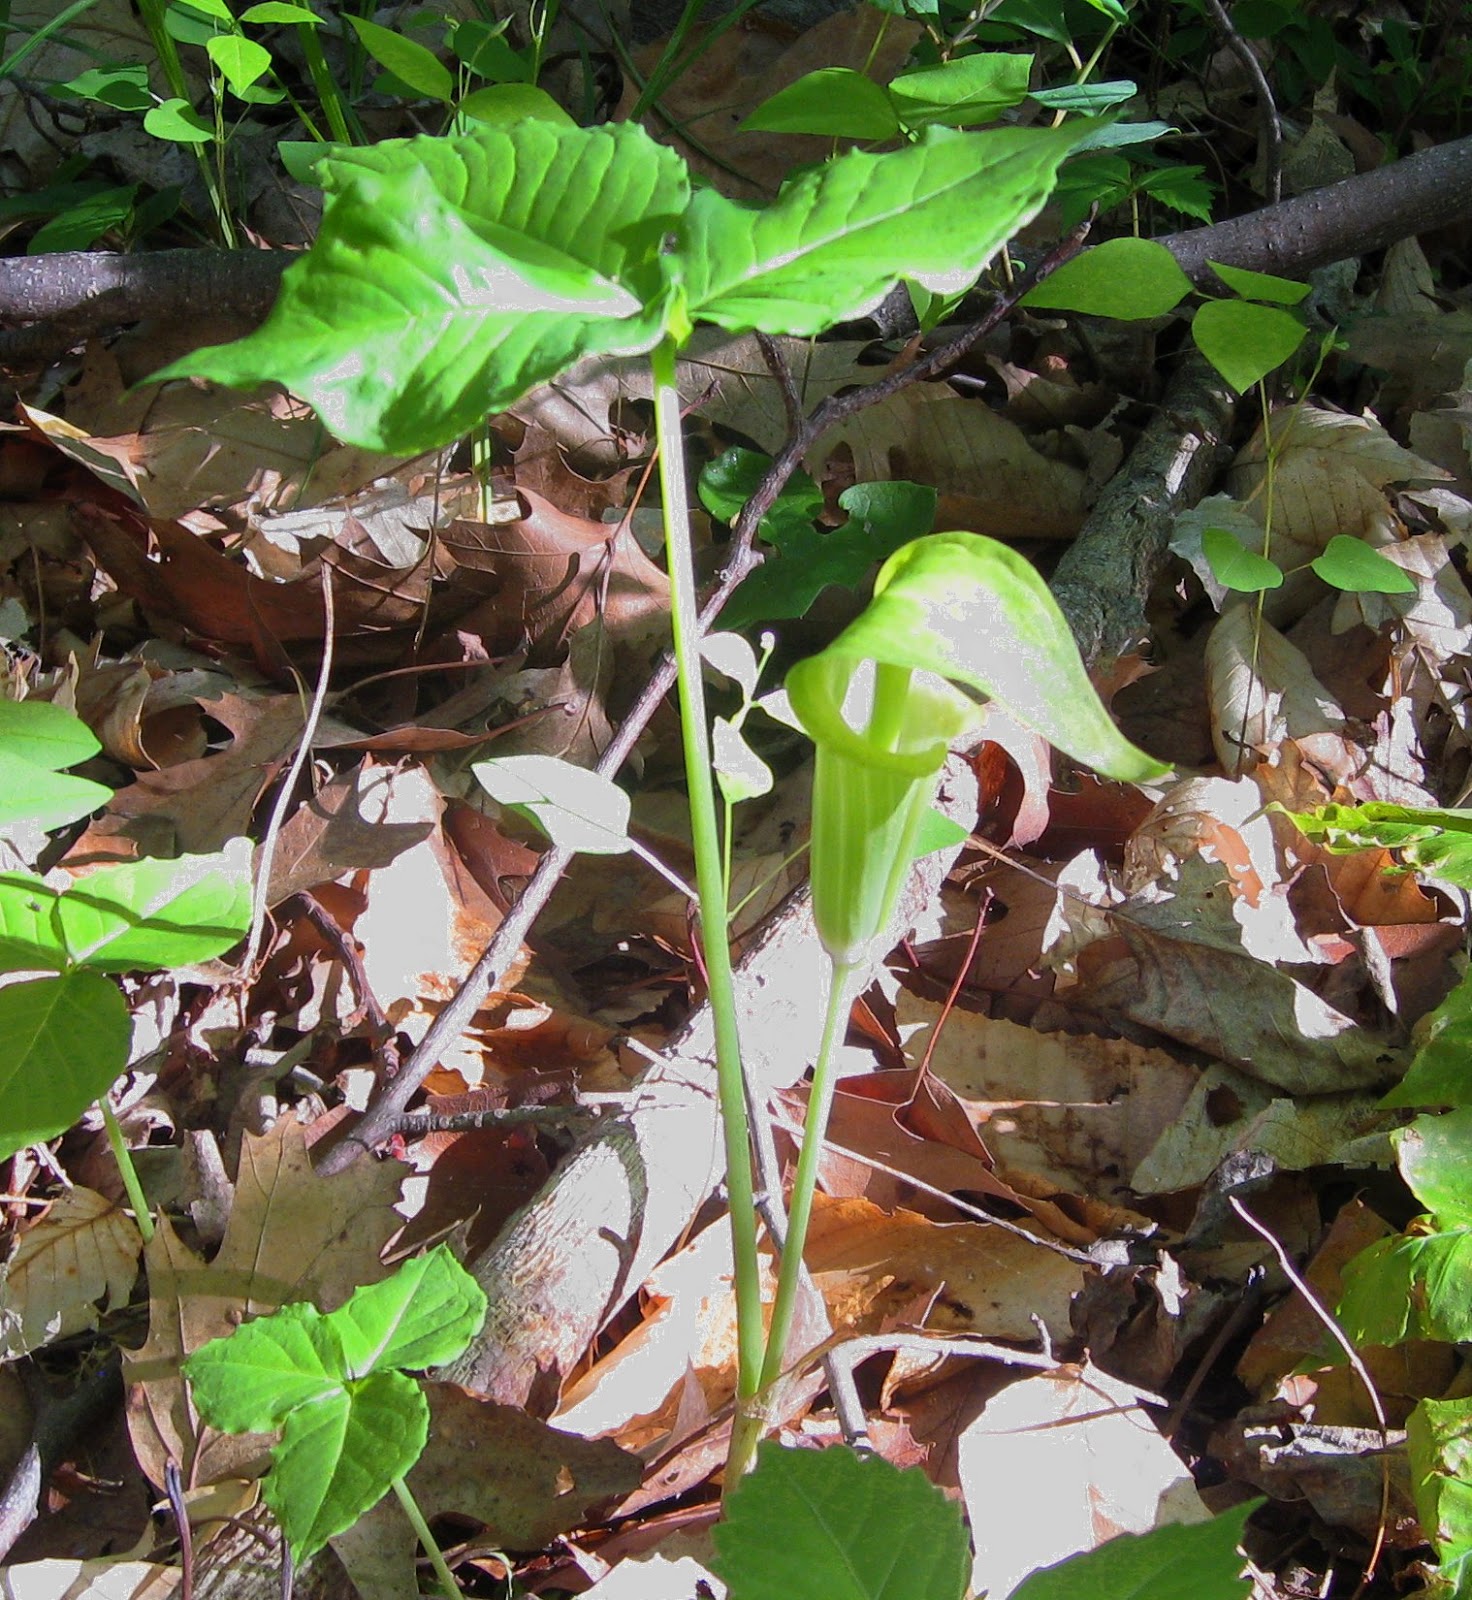 Image of jack-in-the-pulpit by K. R. Smith - may be used with attribution